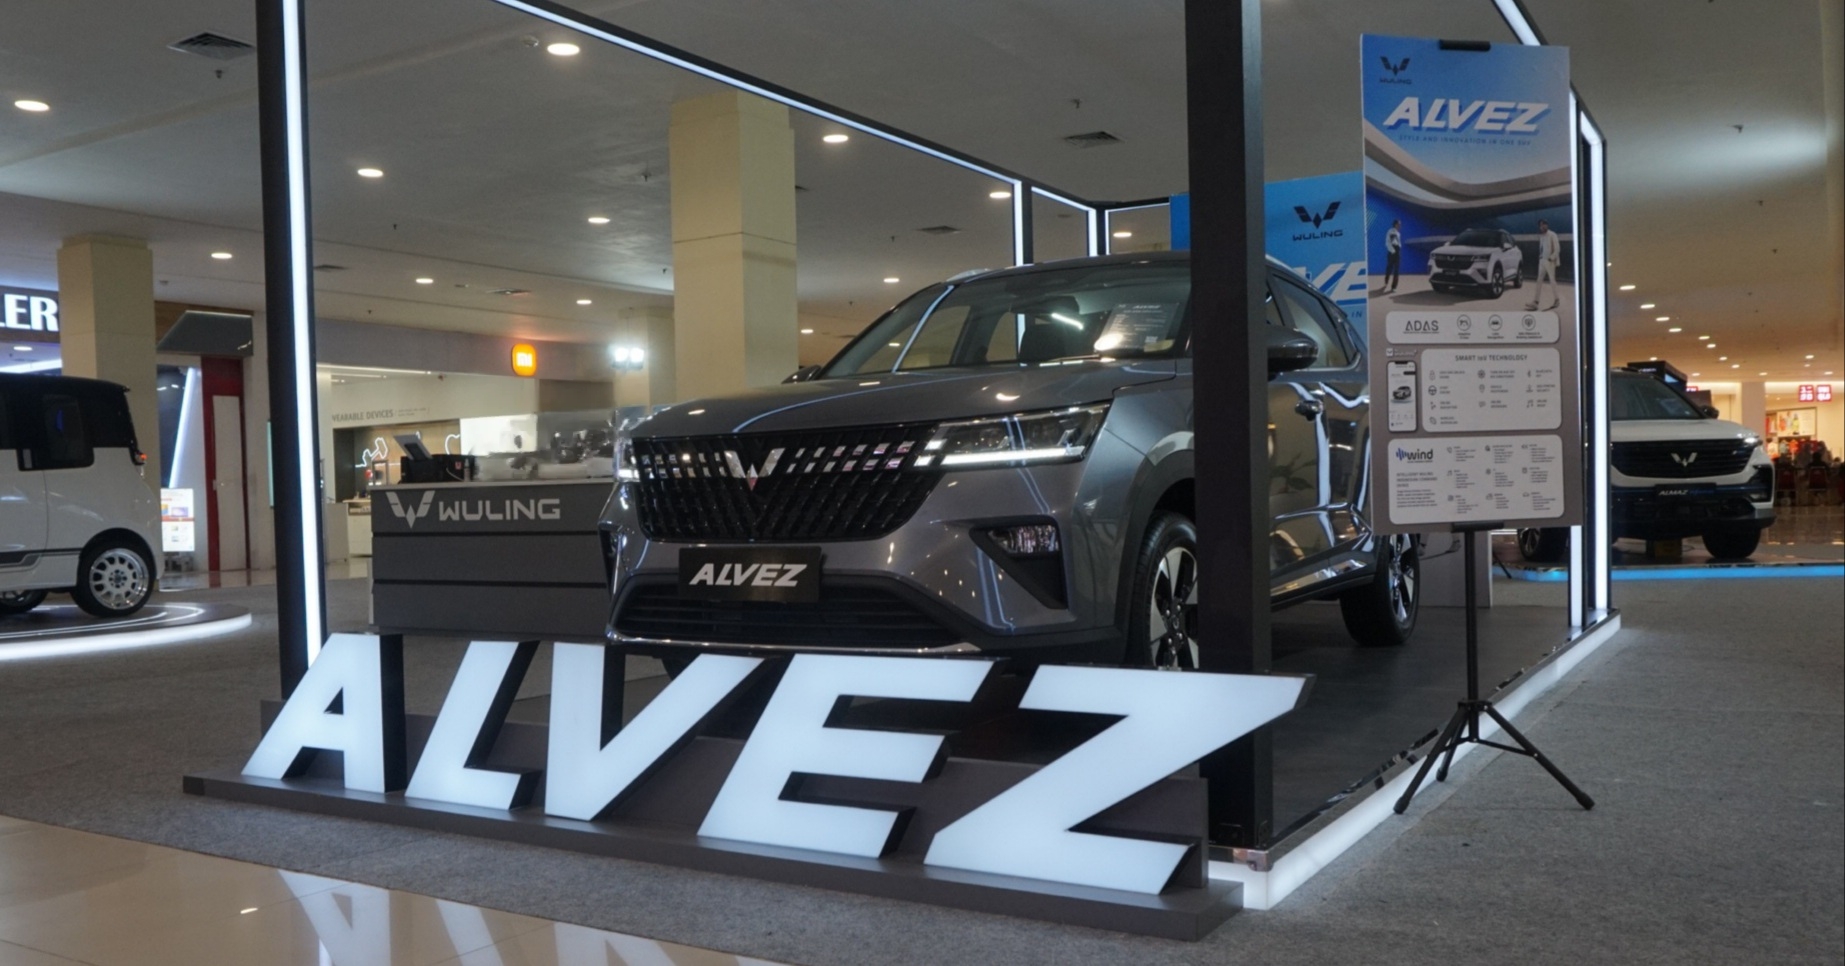 Image Wuling Alvez, ‘Style & Innovation in One SUV’ Officially Marketed in Bogor City